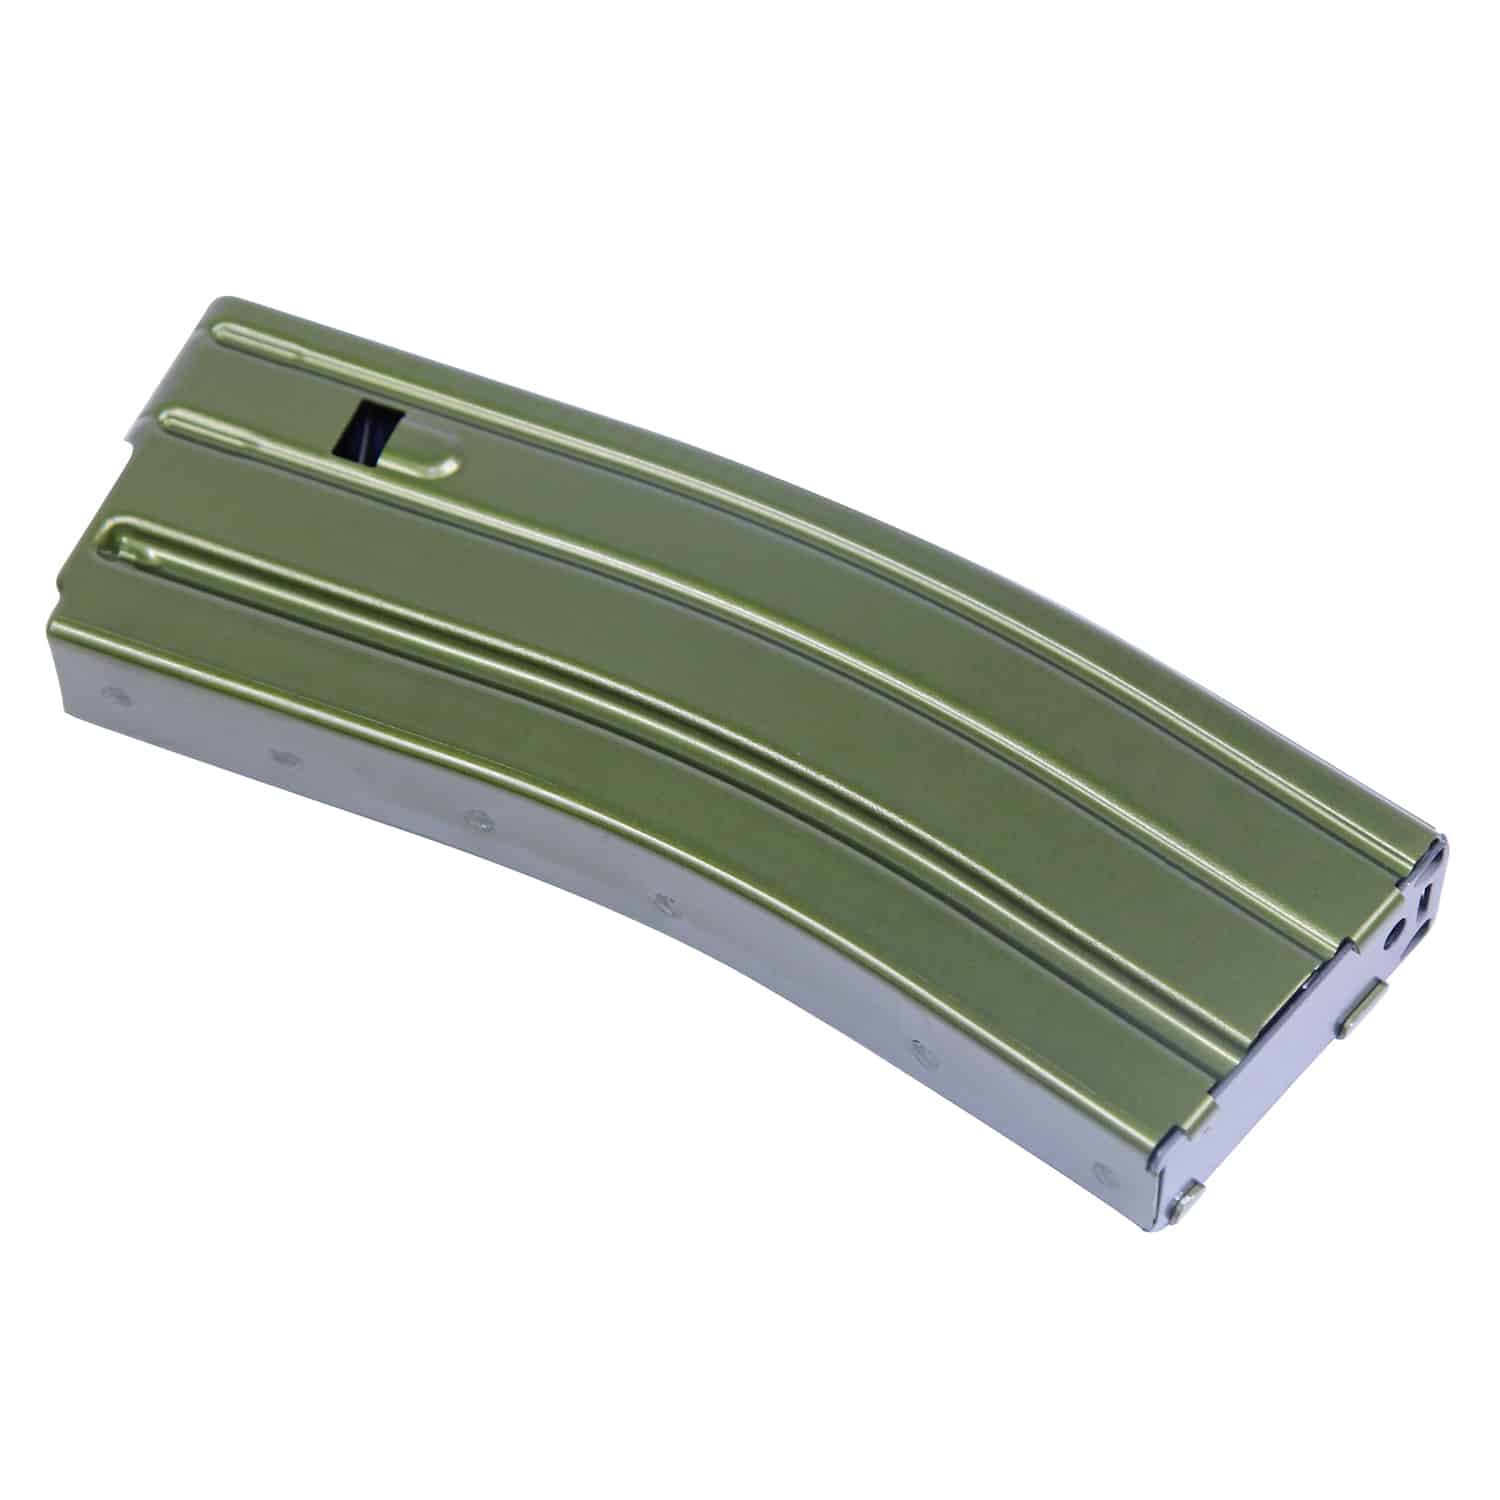 AR 5.56 Cal 30 Round Magazine With Anti-Tilt Follower in Anodized Green